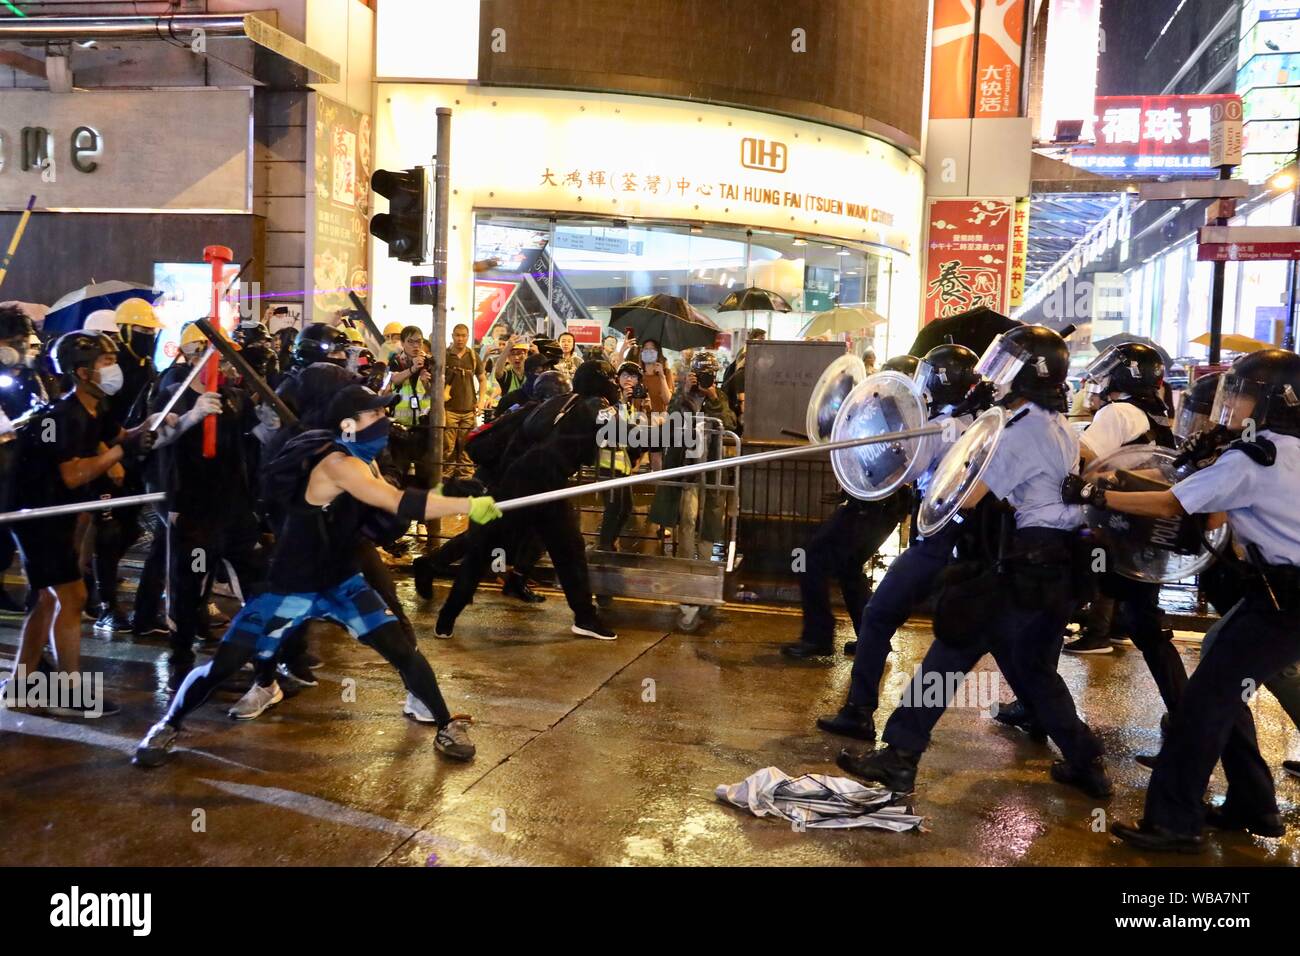 Beijing, New Territories of south China's Hong Kong. 25th Aug, 2019. Radical protesters attack police officers in Tsuen Wan, in the western New Territories of south China's Hong Kong, Aug. 25, 2019. Radical protesters block various roads, hurl bricks and stones at police officers in the protest. Credit: Lui Siu Wai/Xinhua/Alamy Live News Stock Photo